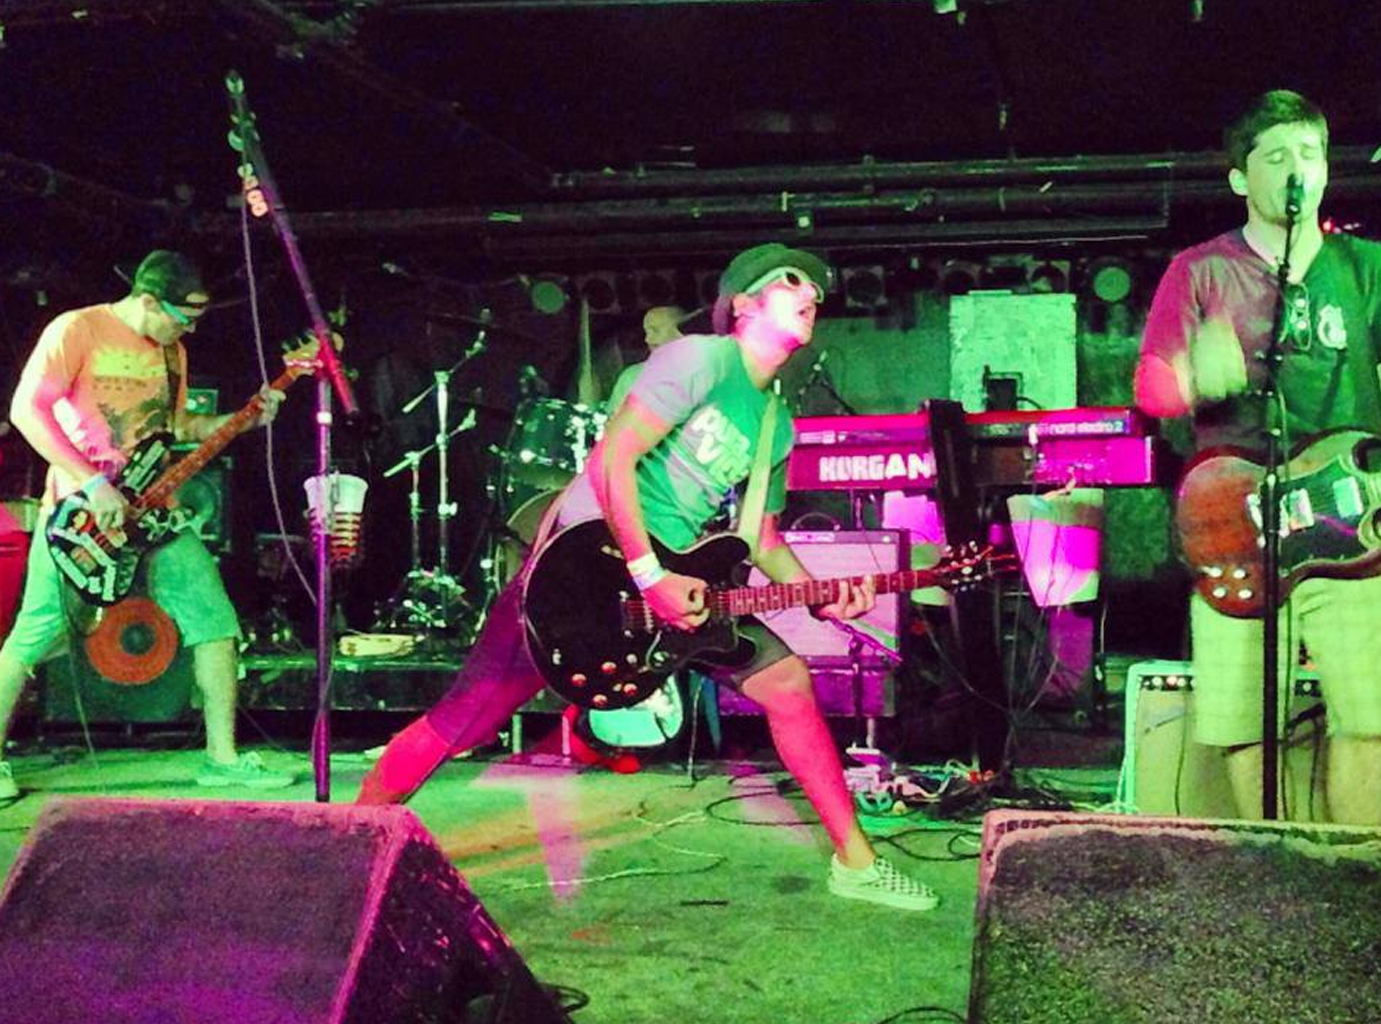 Show at the Middle East, Boston, MA, 2014